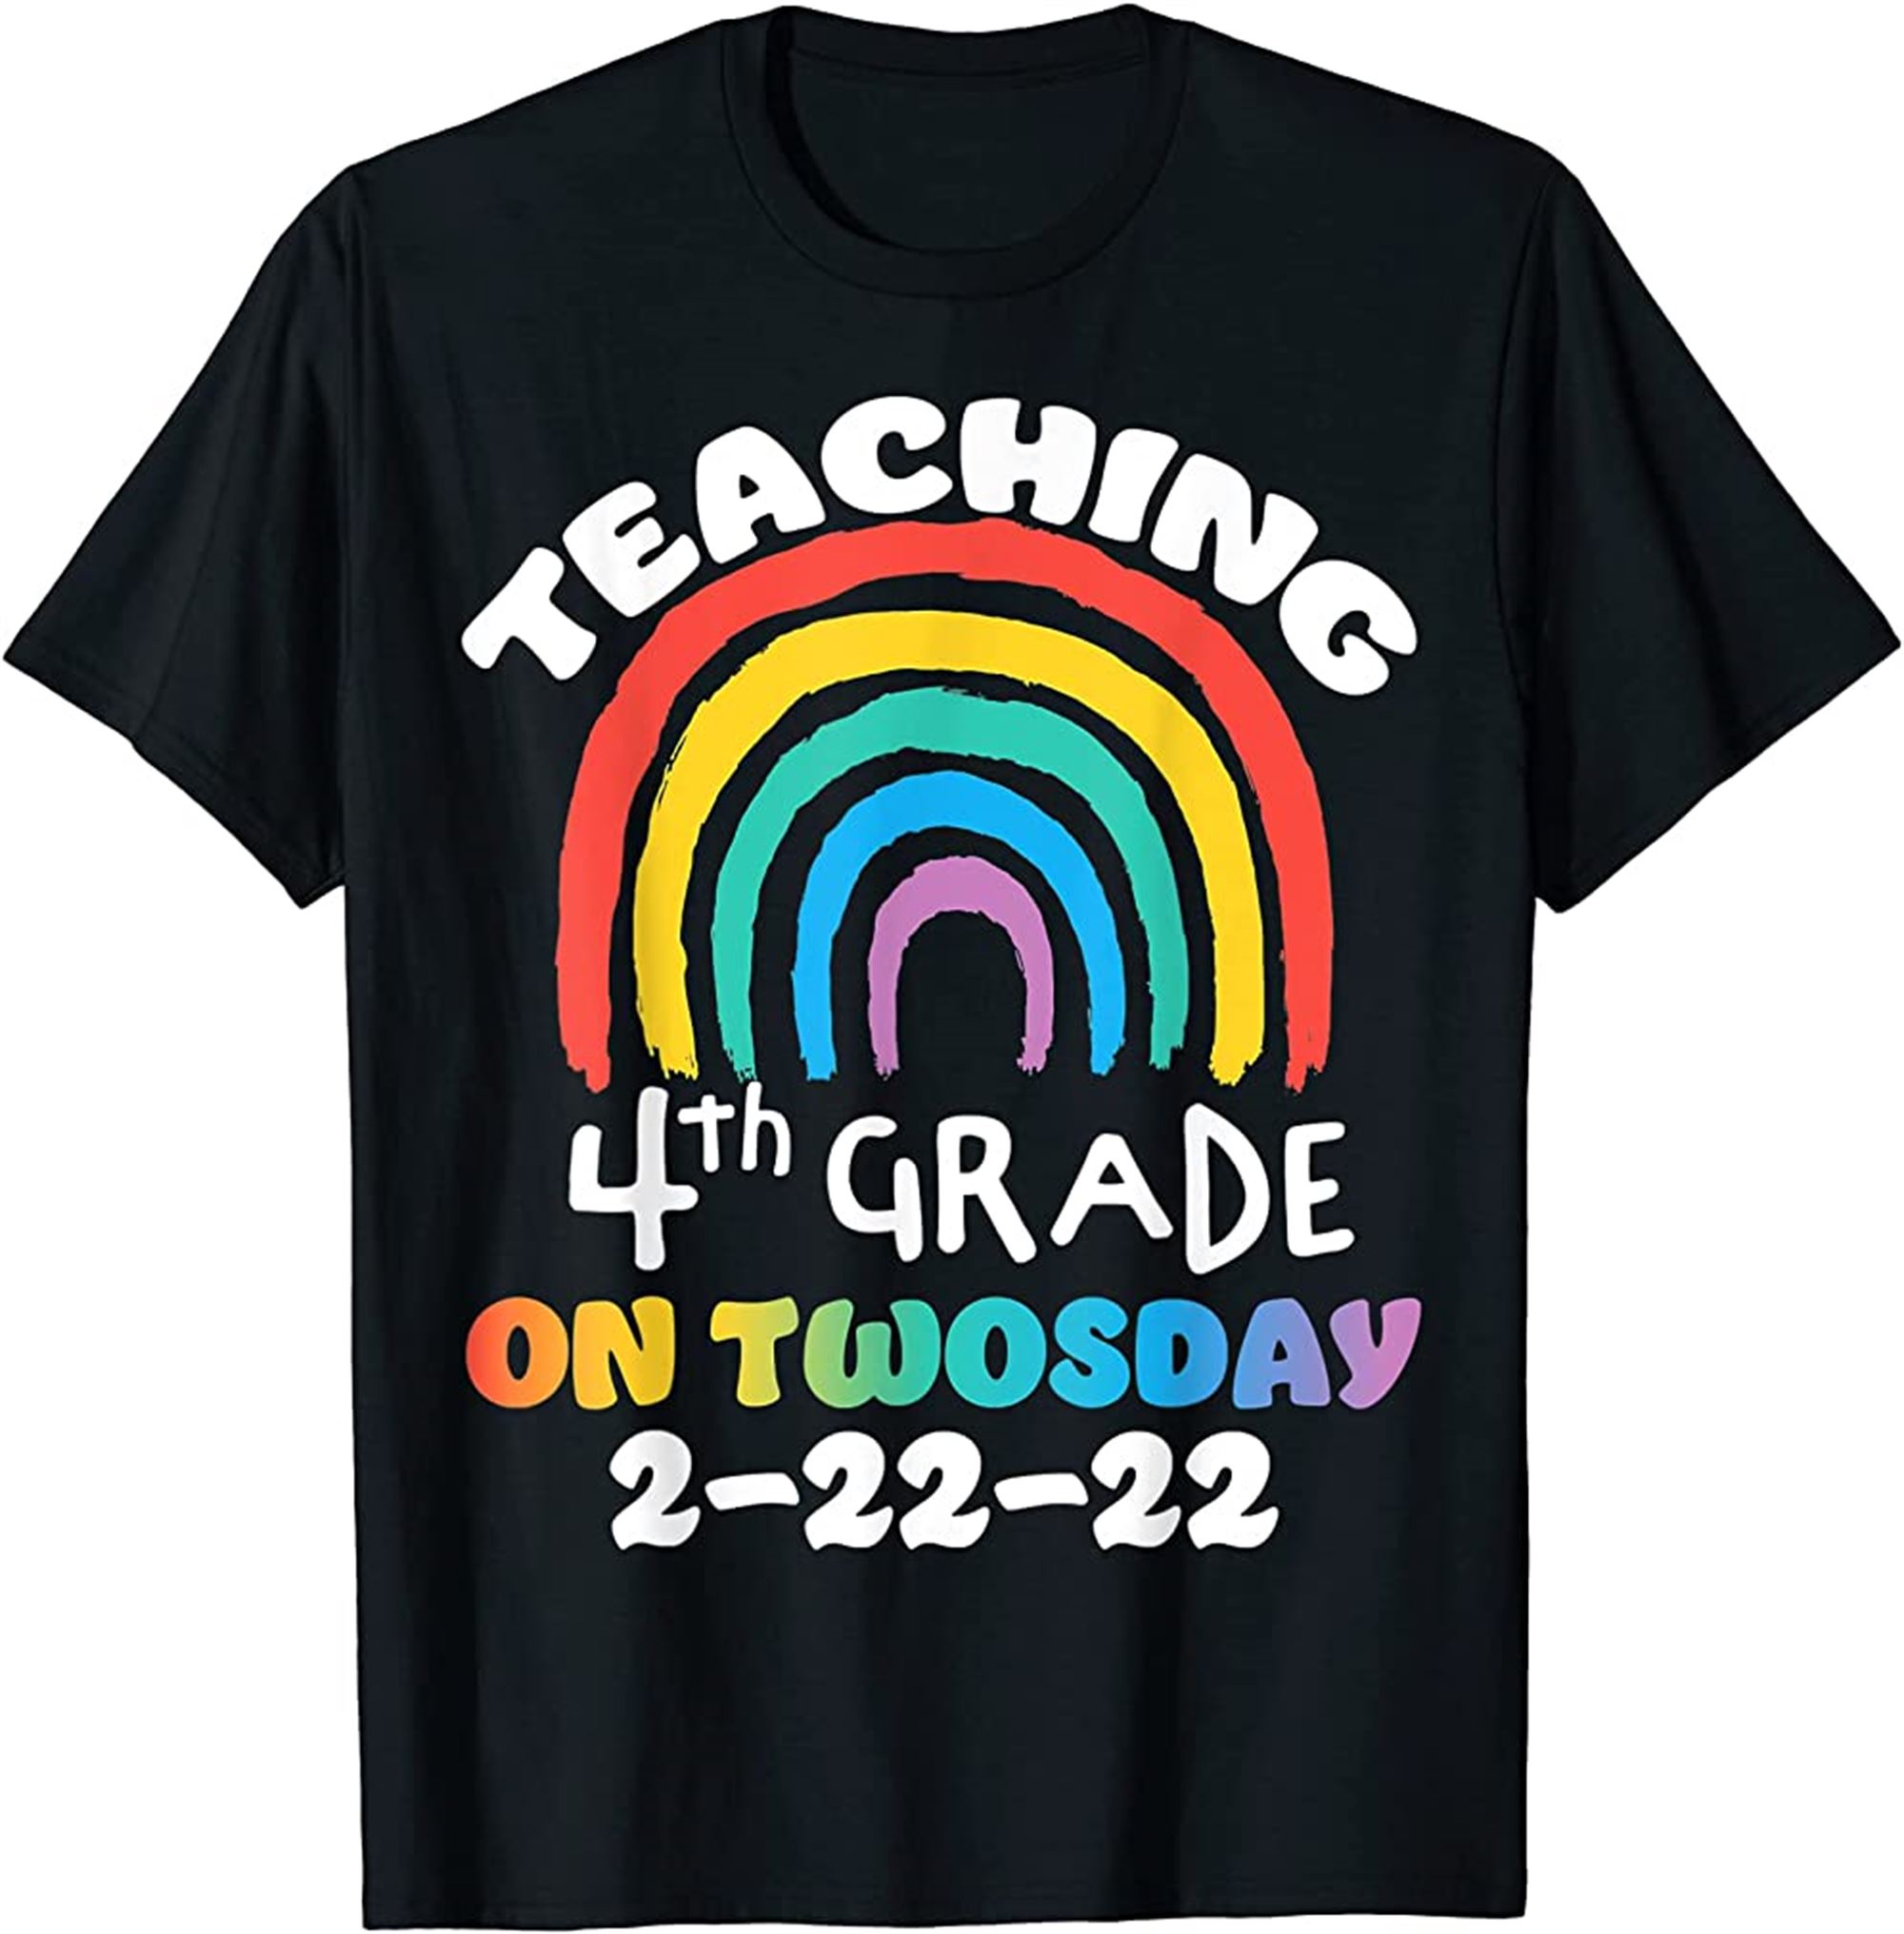 Teaching 4th Grade On Twosday 2 22 22 February 22 2022 Tshirt Size Up To 5xl